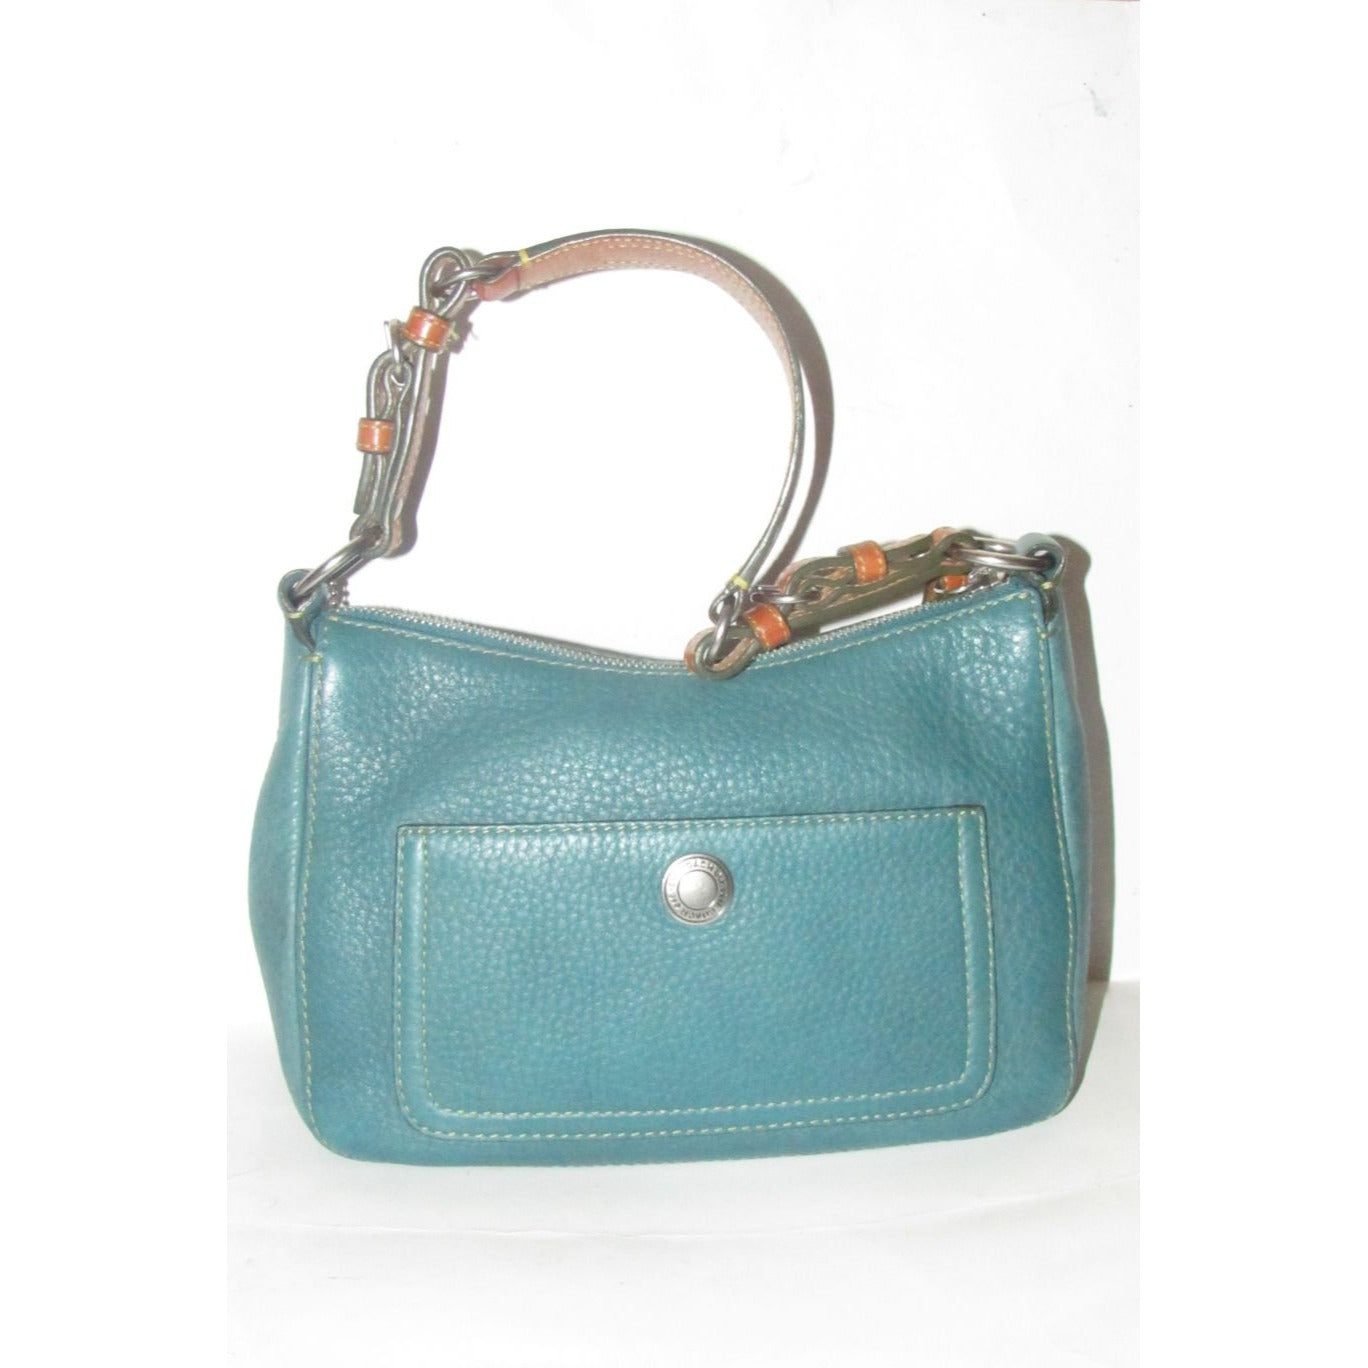 Coach, 'Chelsea' hobo, in a teal soft leather, hobo style purse with a brown, strap with unique chrome buckles